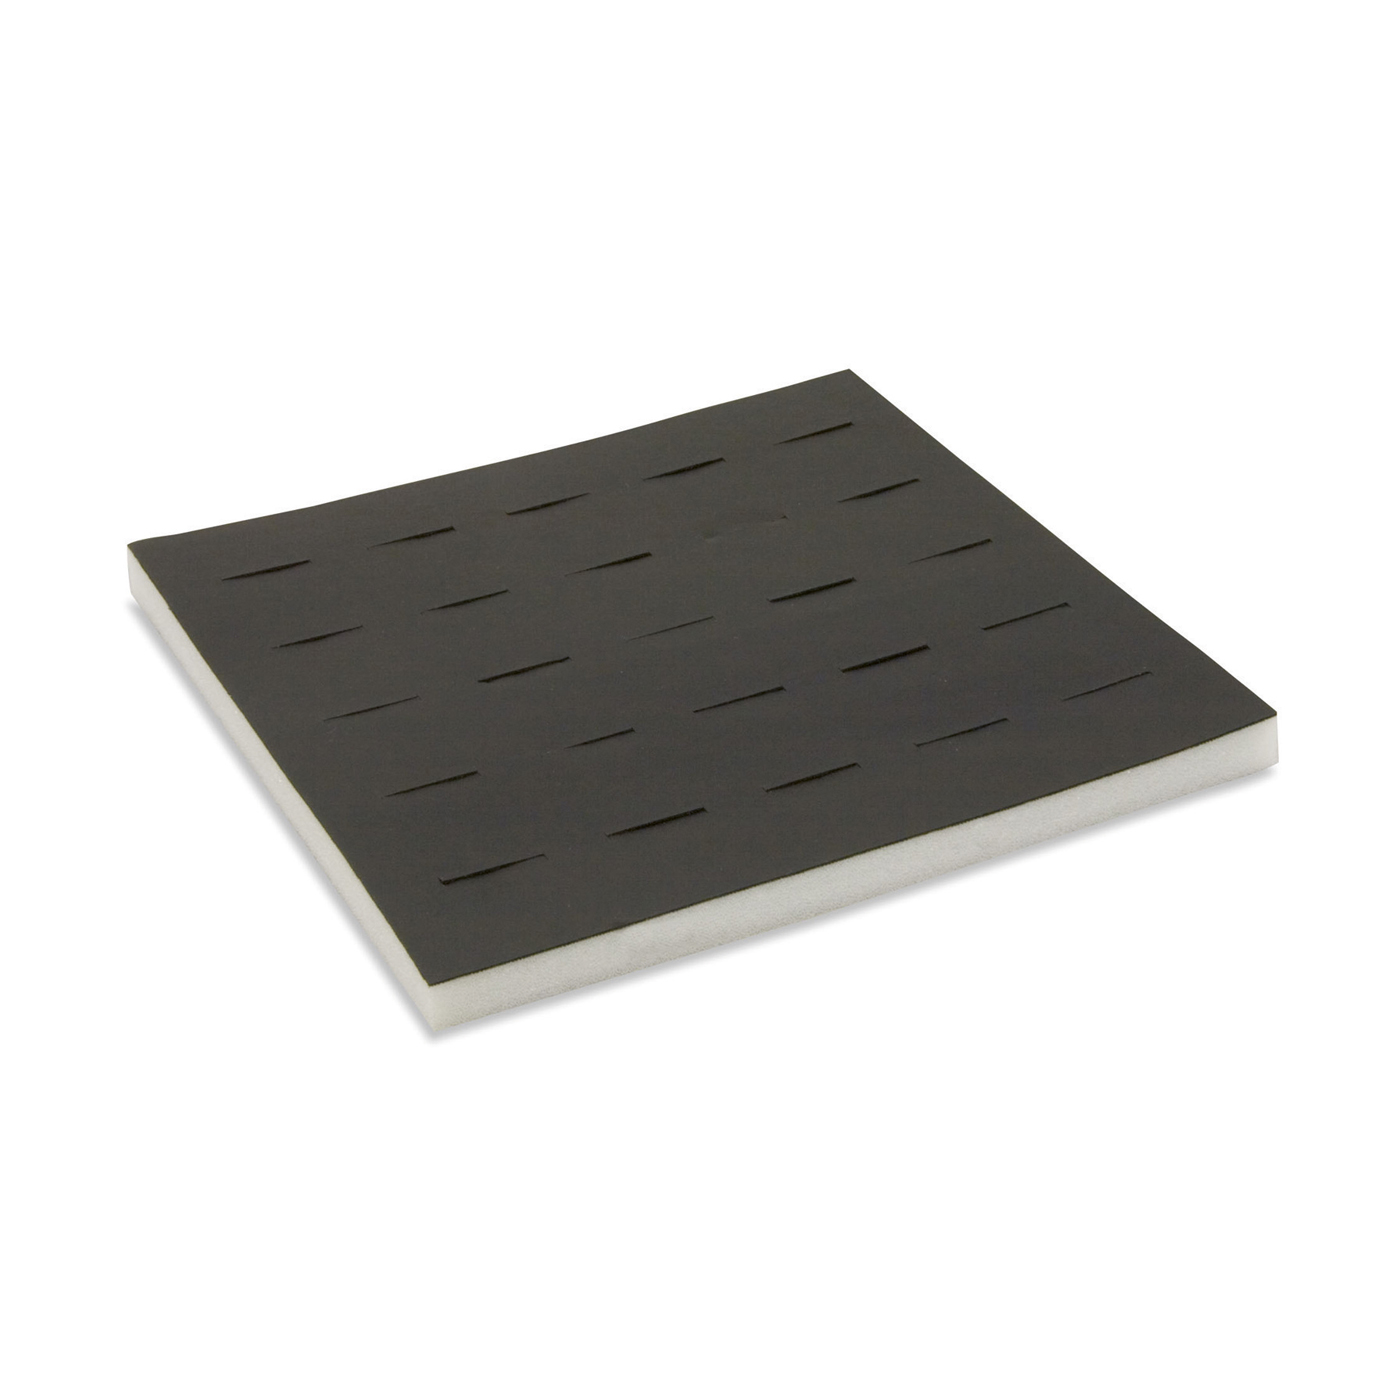 Tray System Inlay, Black, for 25 Rings, 224 x 224 mm - 1 piece